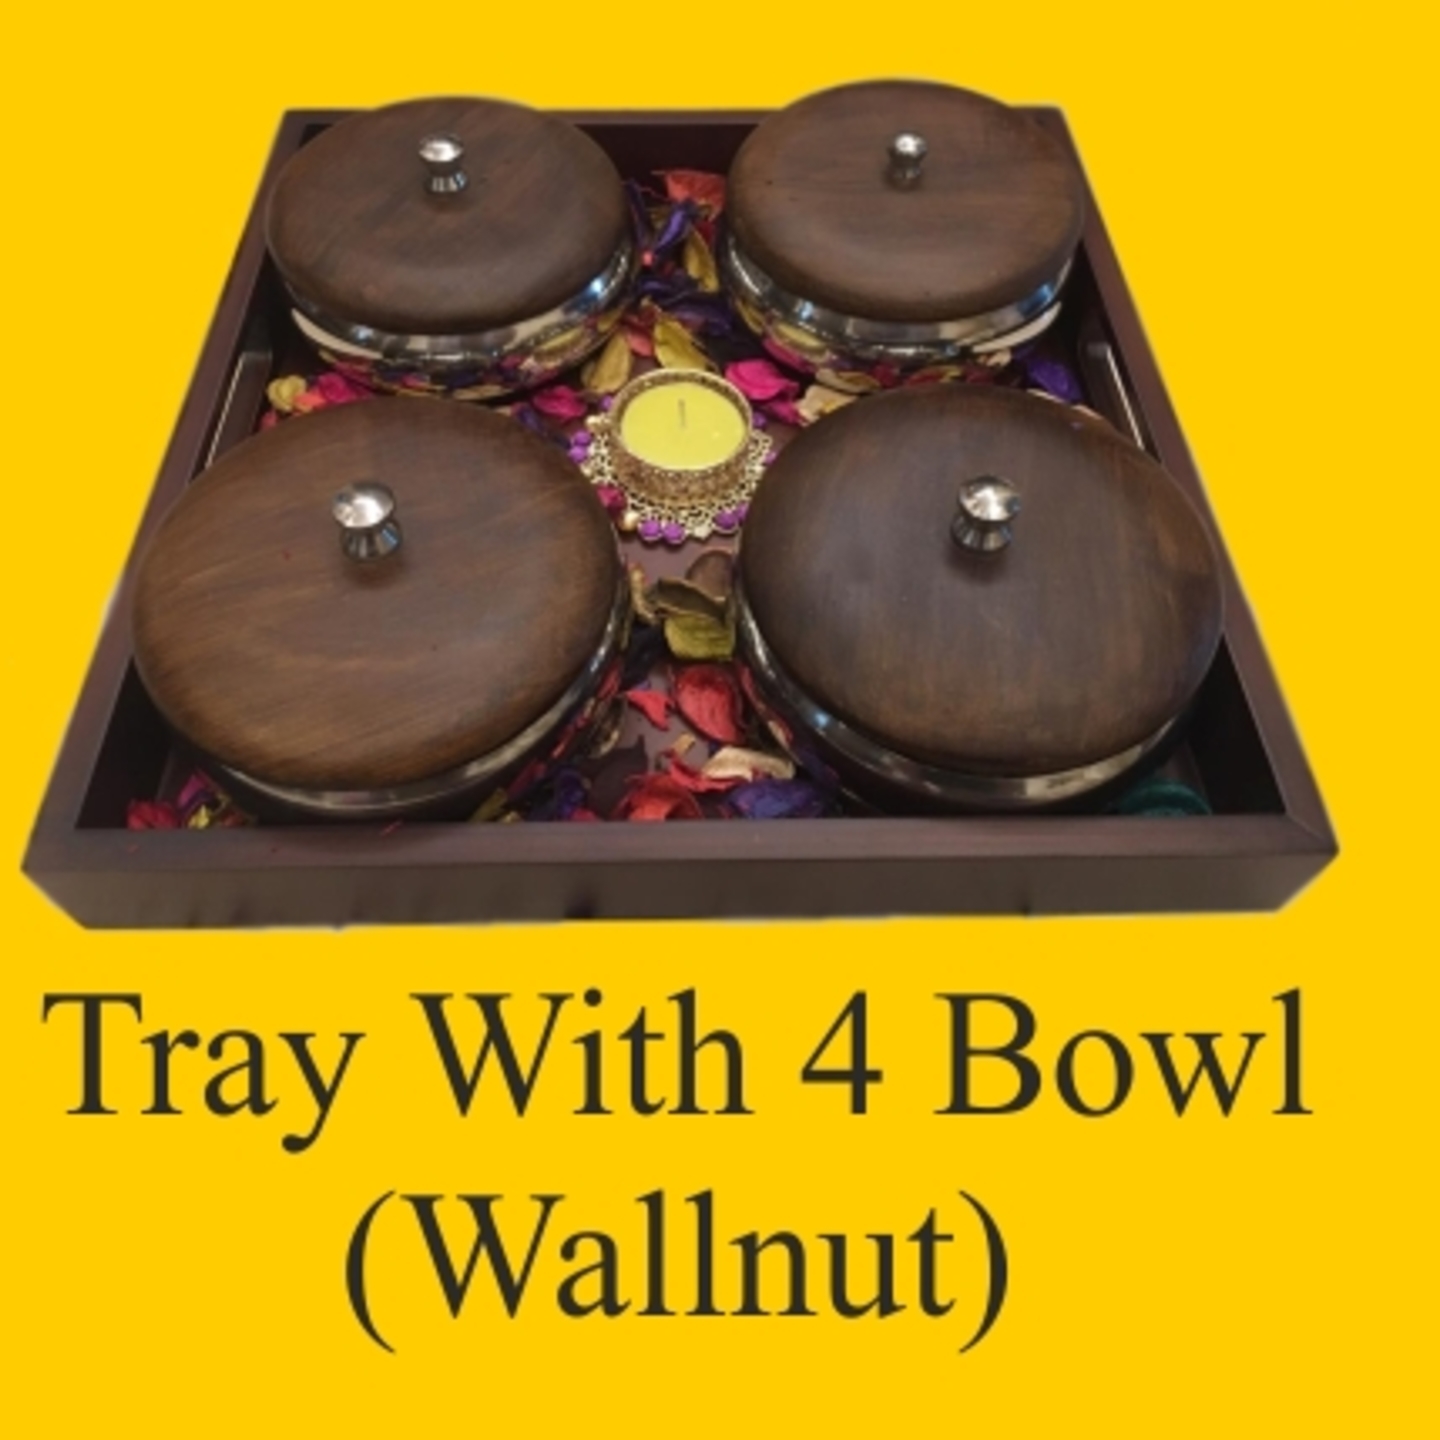 Tray With 4 Bowl